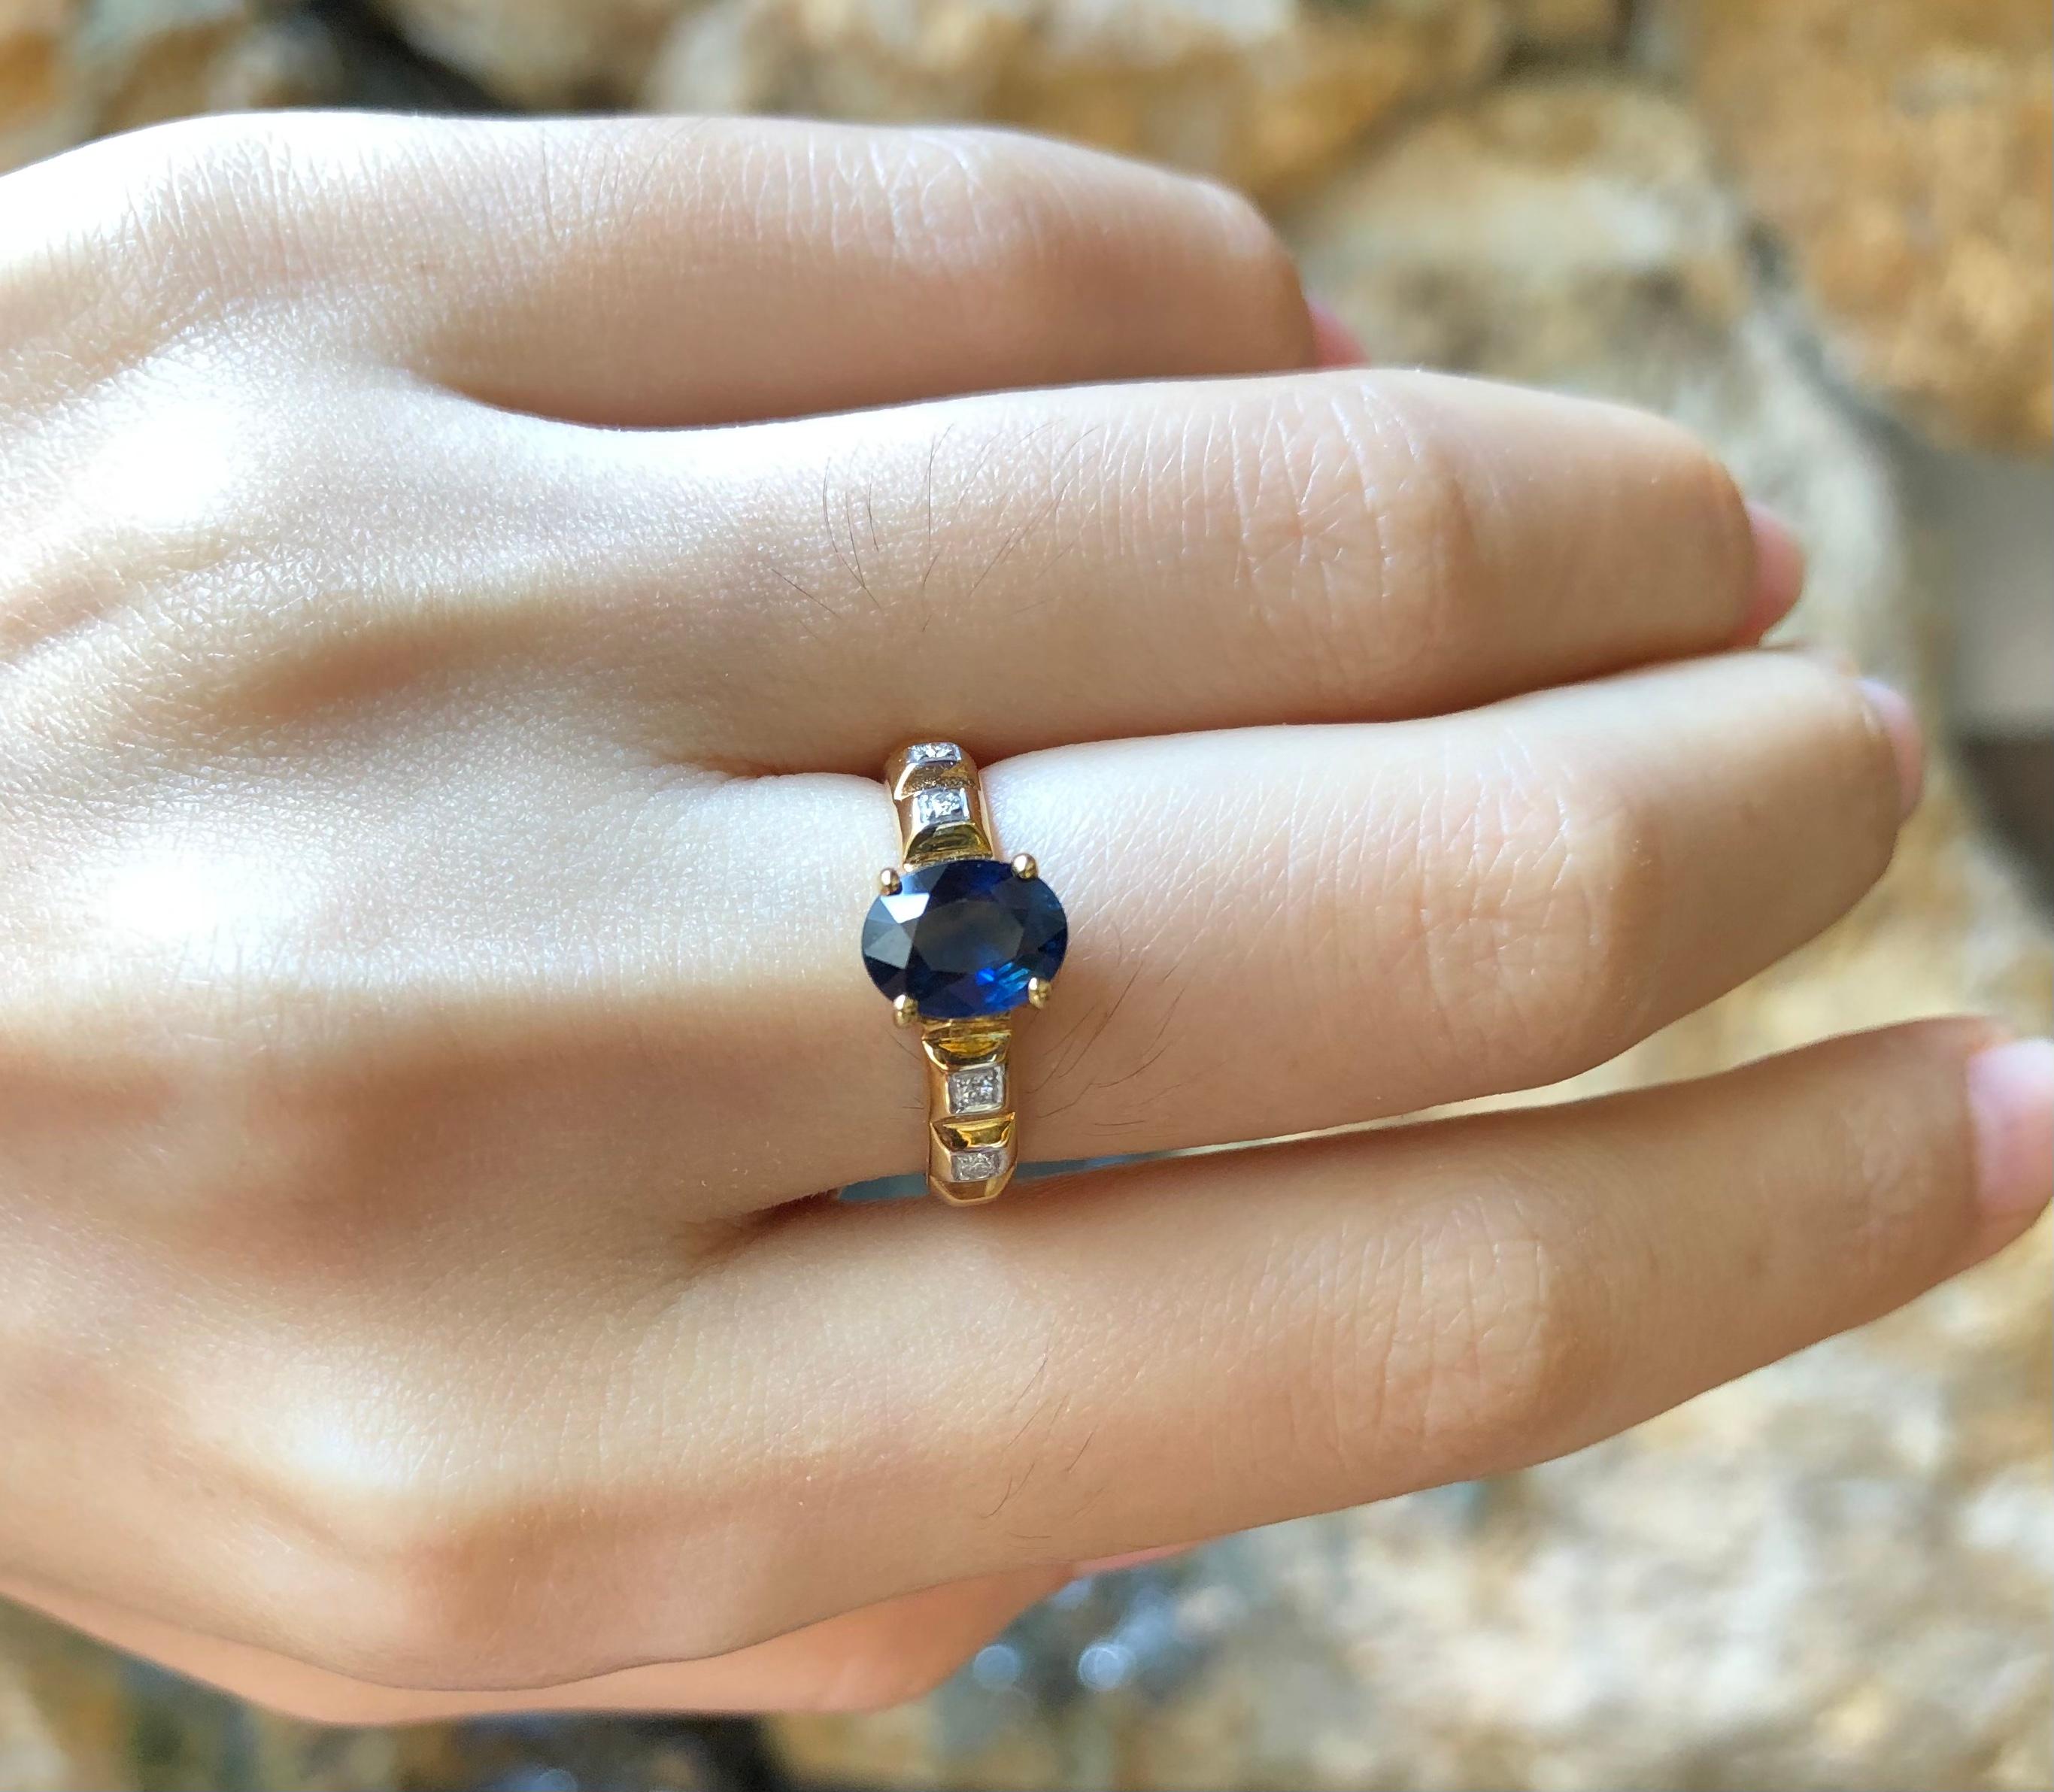 Blue Sapphire 1.55 carats with Diamond 0.05 carat Ring set in 18 Karat Gold Settings

Width:  0.6 cm 
Length: 0.8 cm
Ring Size: 51
Total Weight: 5.27 grams

